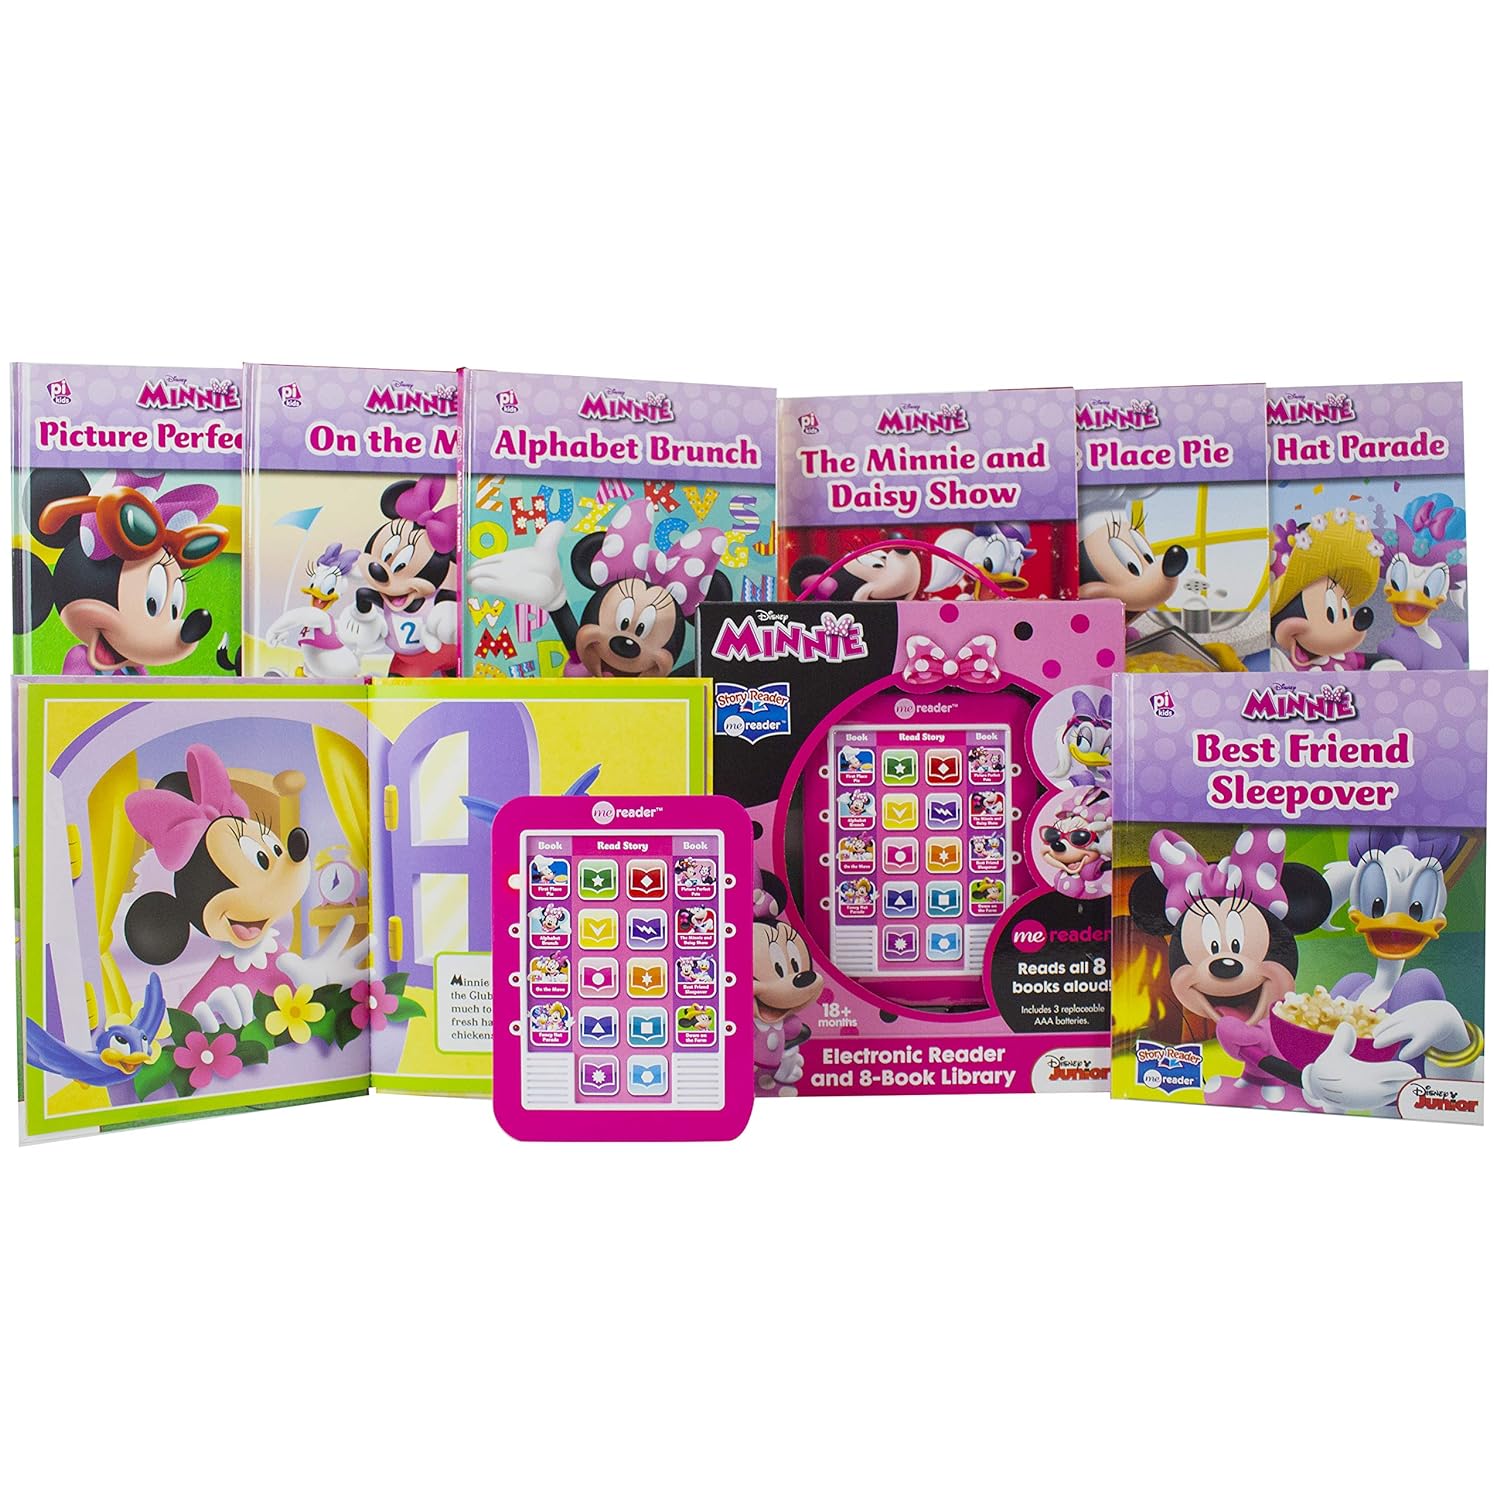 Disney Minnie Electronic Reader And 8 Book Library Hardcover Sound Book